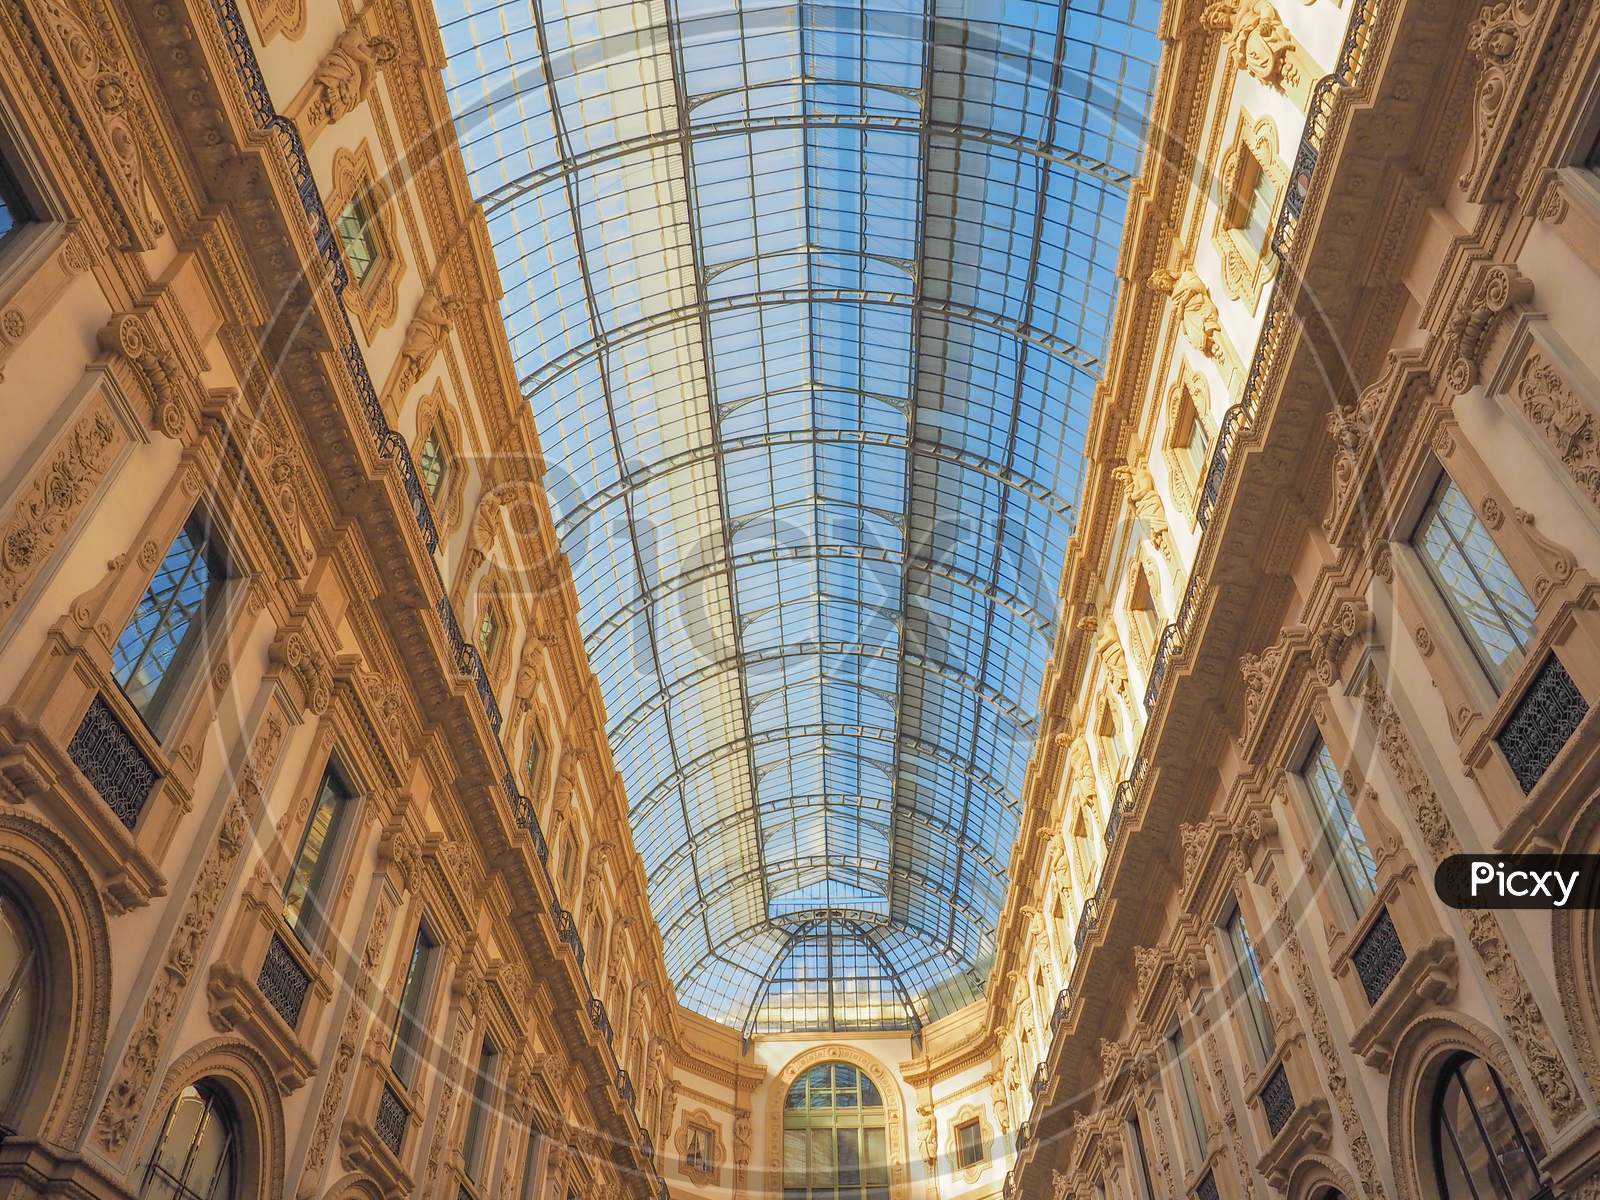 Milan, Italy - March 28, 2015: The Galleria Vittorio Emanuele Ii Has Been Recently Restored For The Expo Milano 2015 International Exhibition